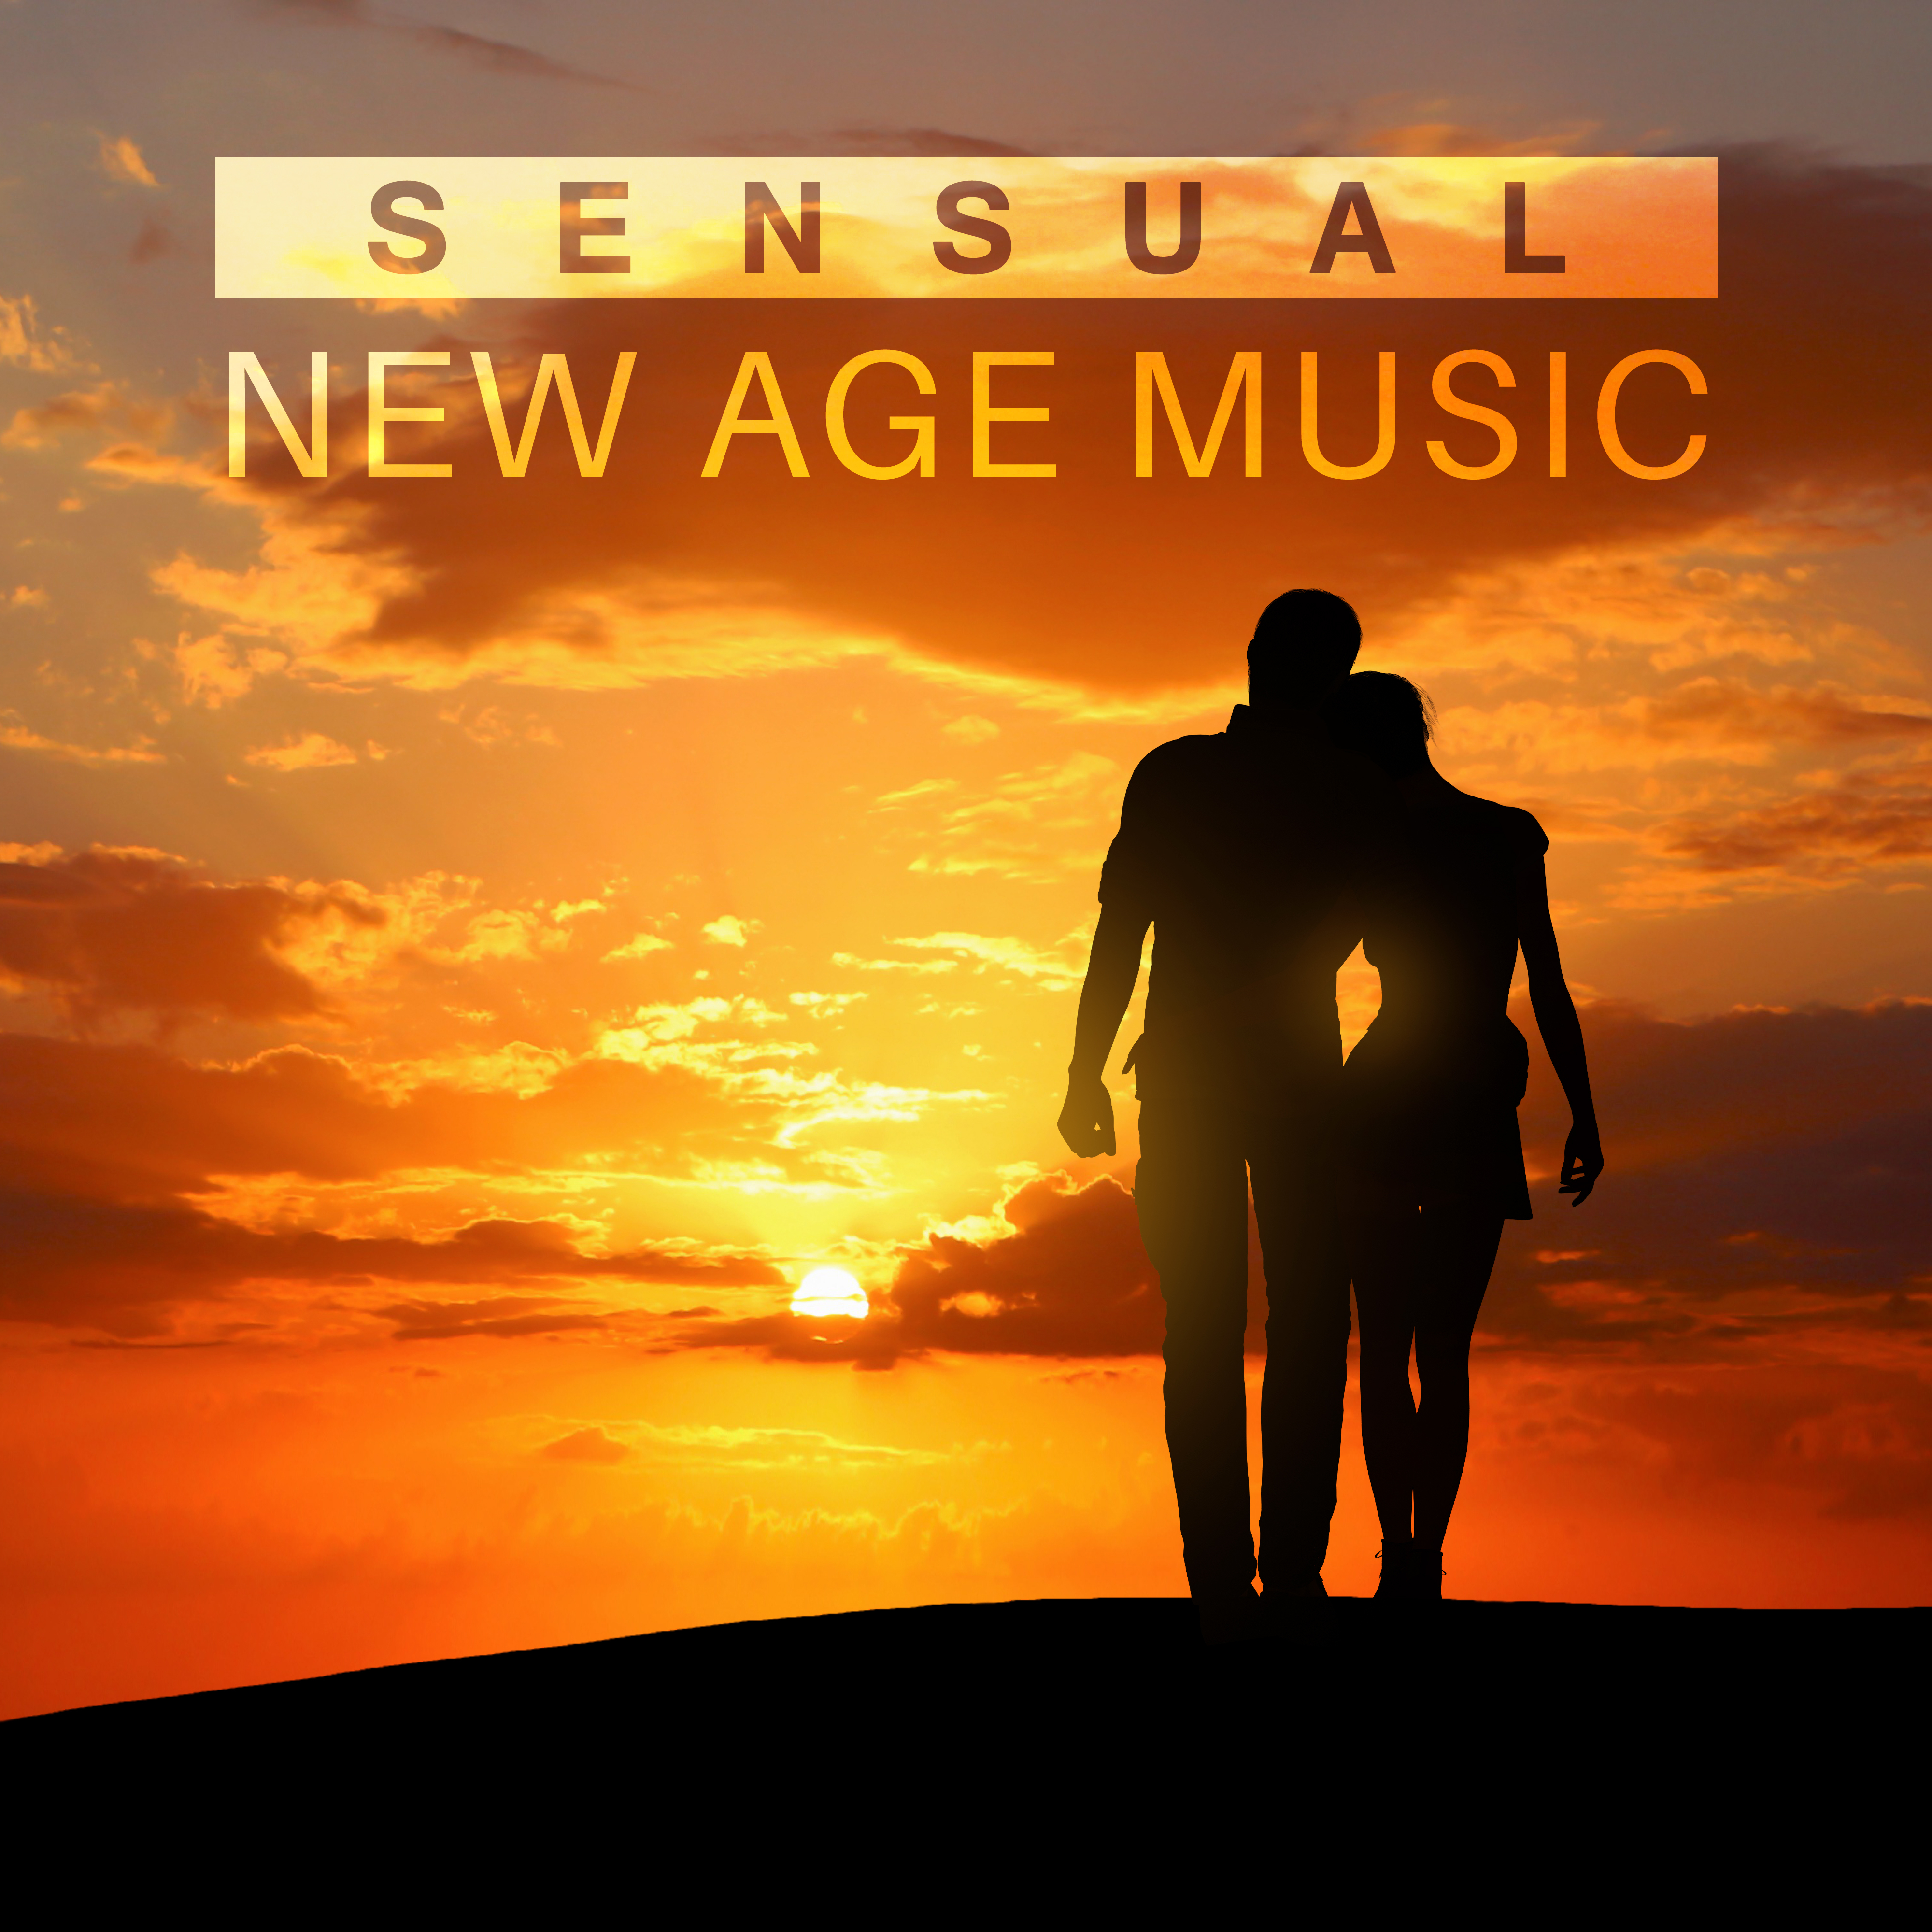 Sensual New Age Music – Tantric ***, Deep Massage, Romantic Evening, Nature Sounds for Relaxation, Erotic Dance